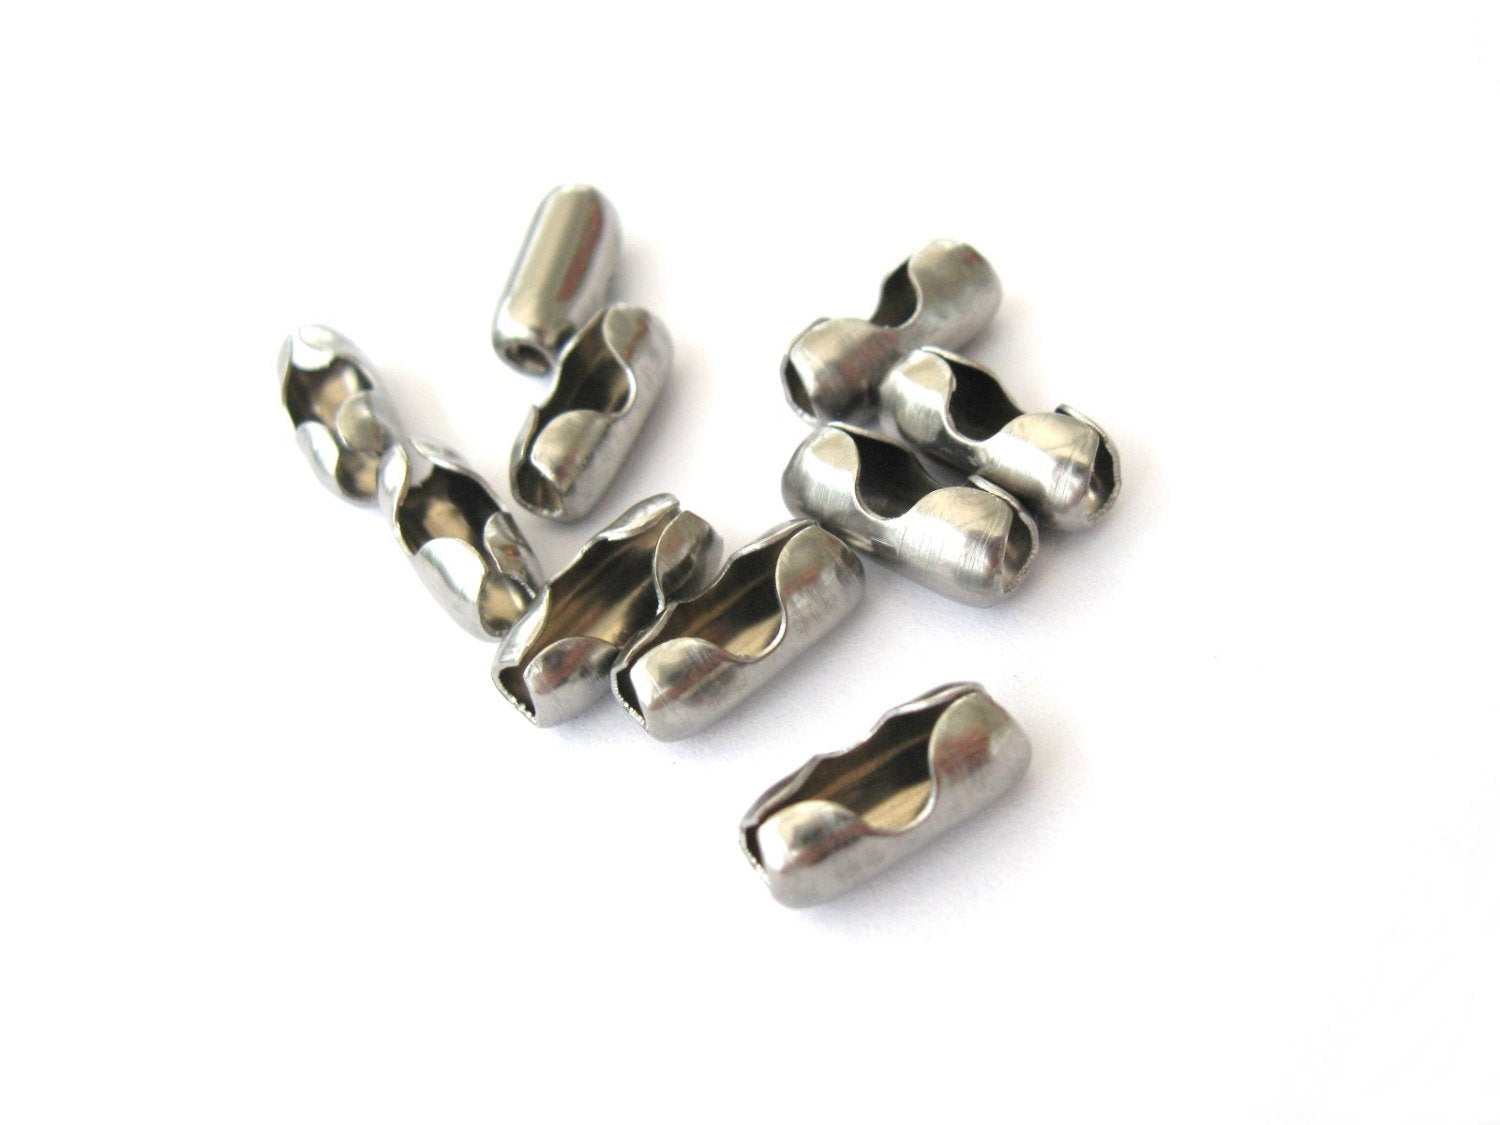 Ball Chain 8mm Surgical Stainless Steel (Priced per Foot)